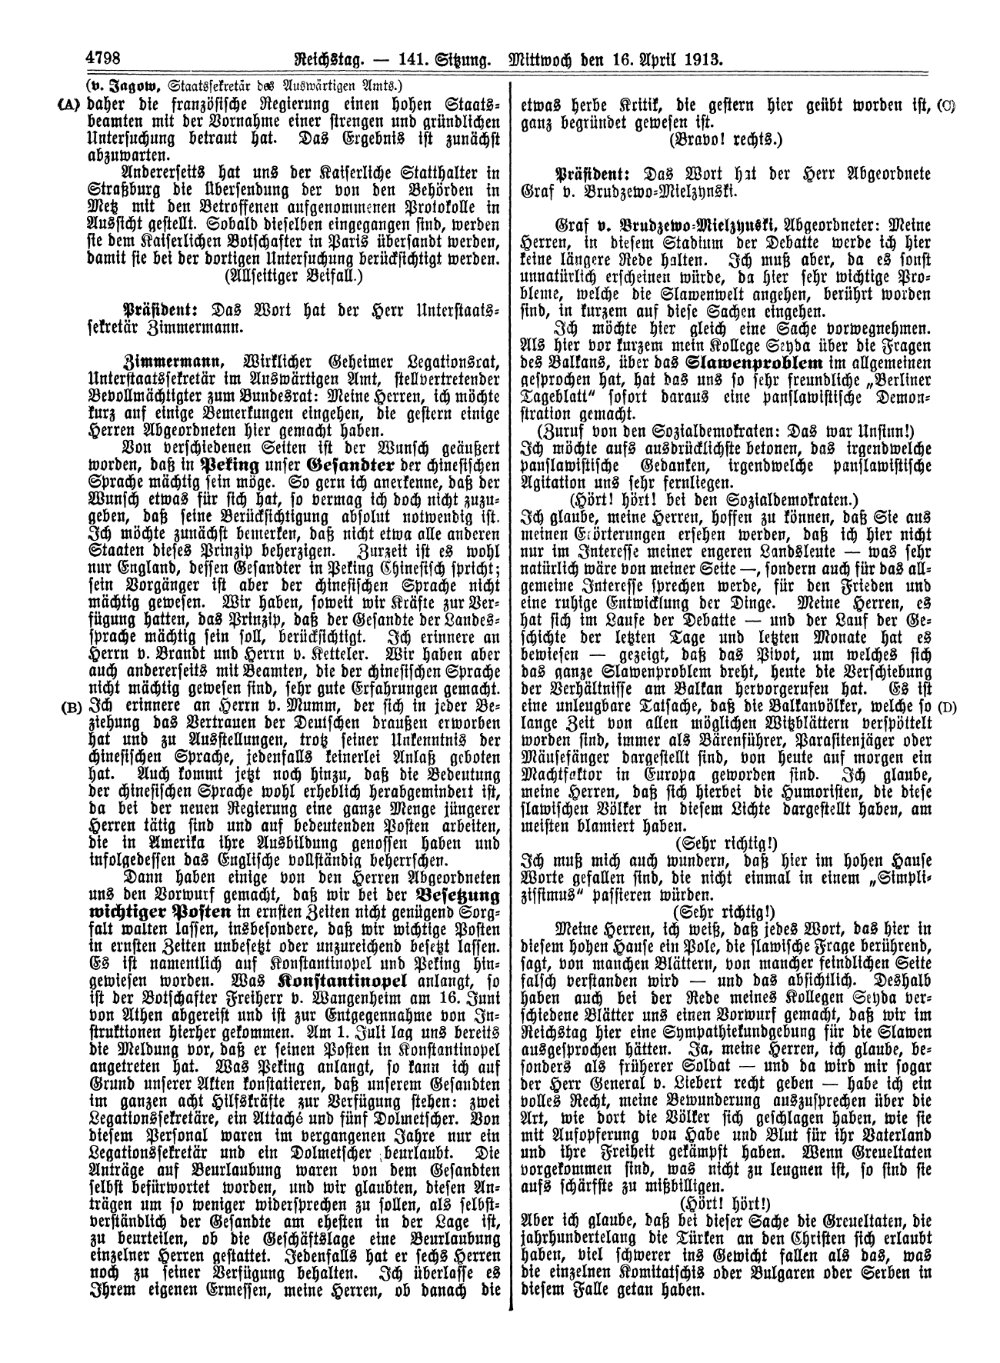 Scan of page 4798